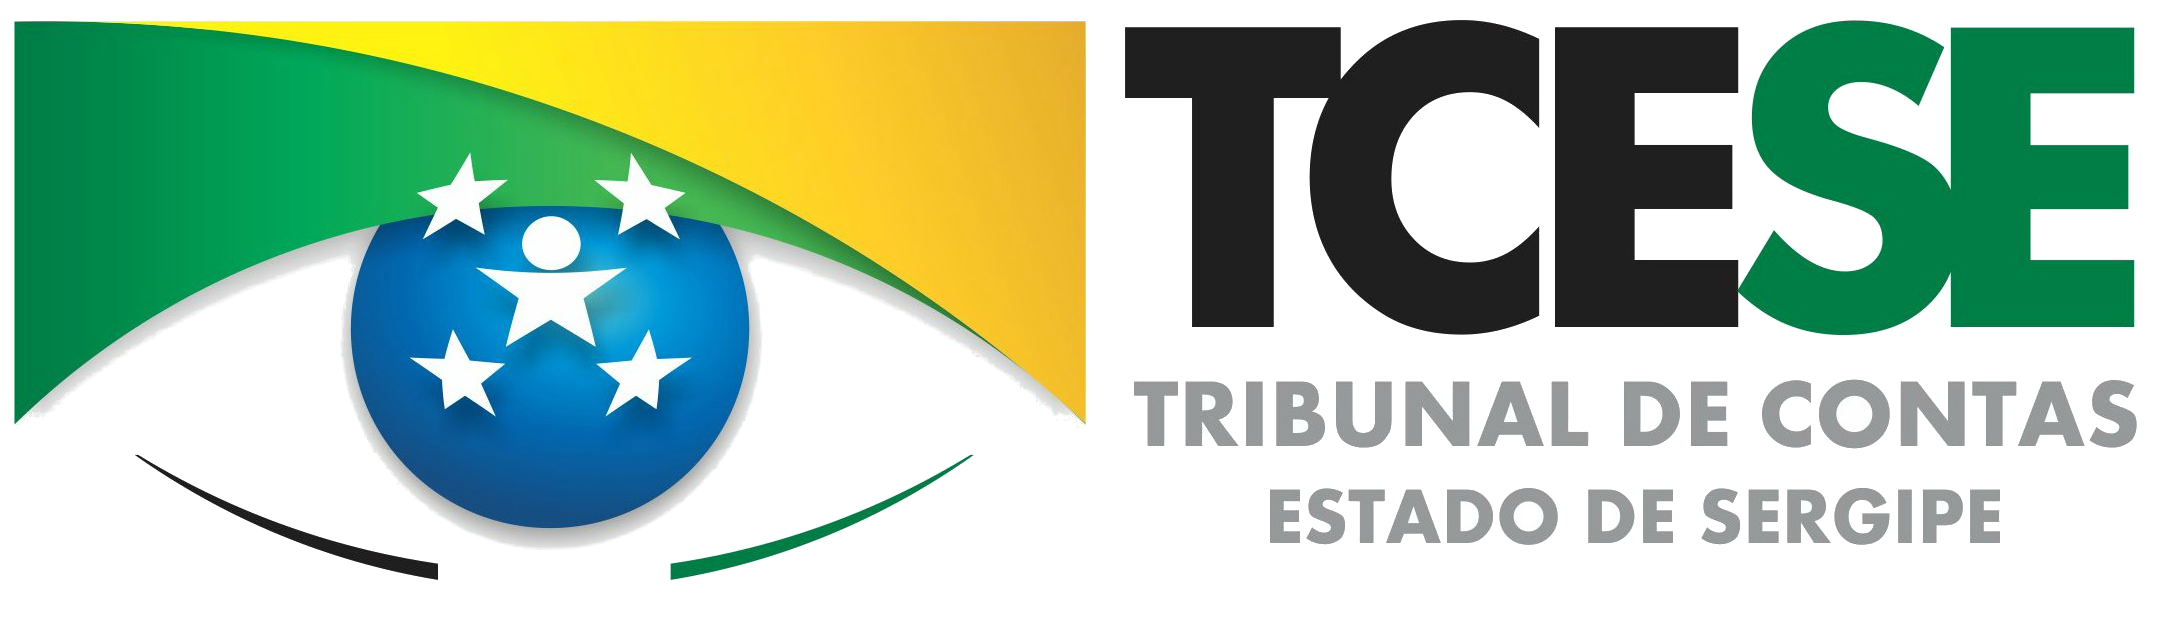 Logotipo TCESE